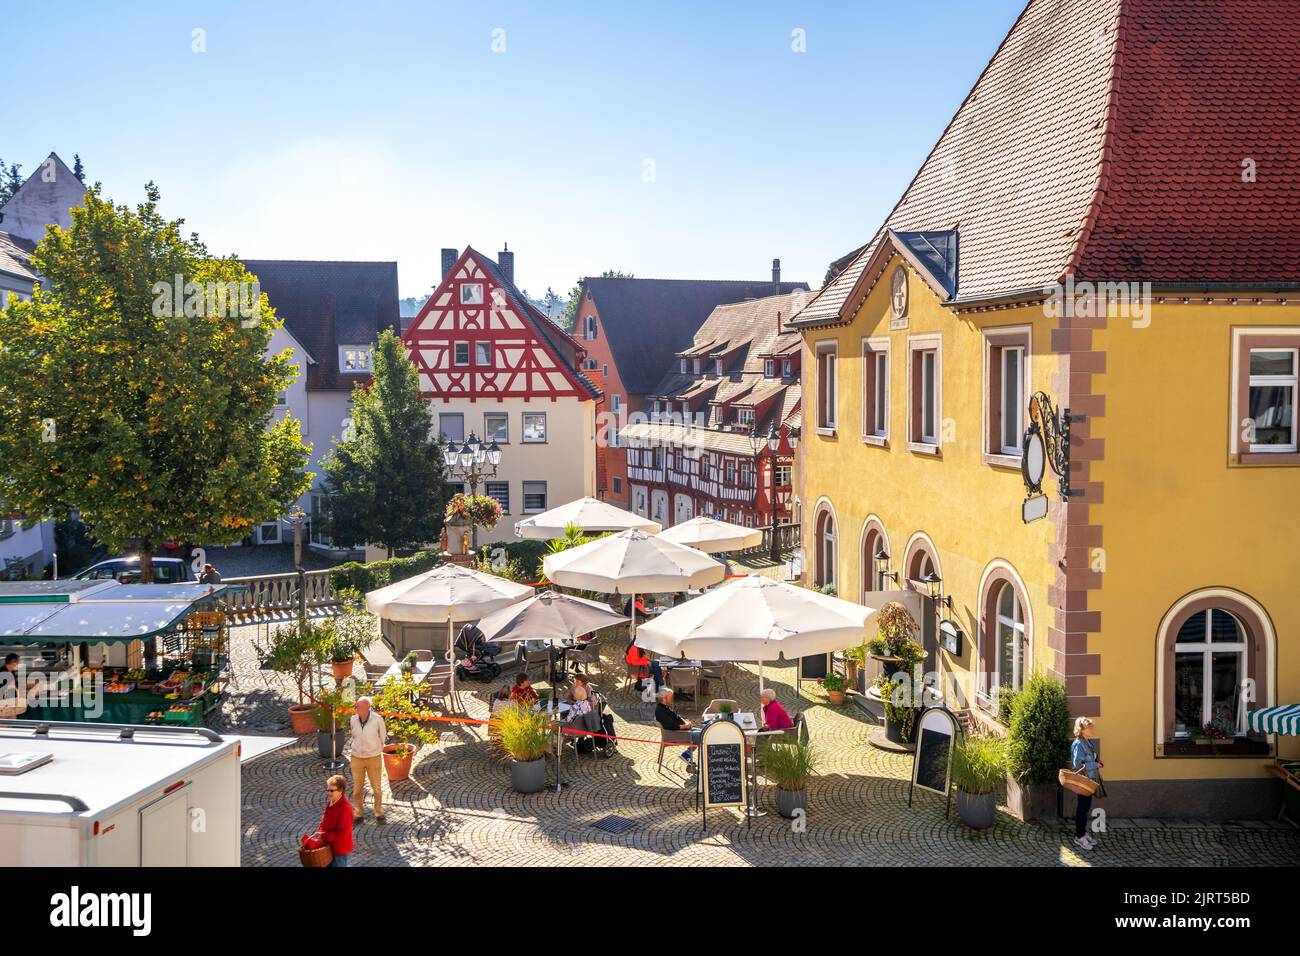 View over Market Place, Pfullendorf, Germany Stock Photo